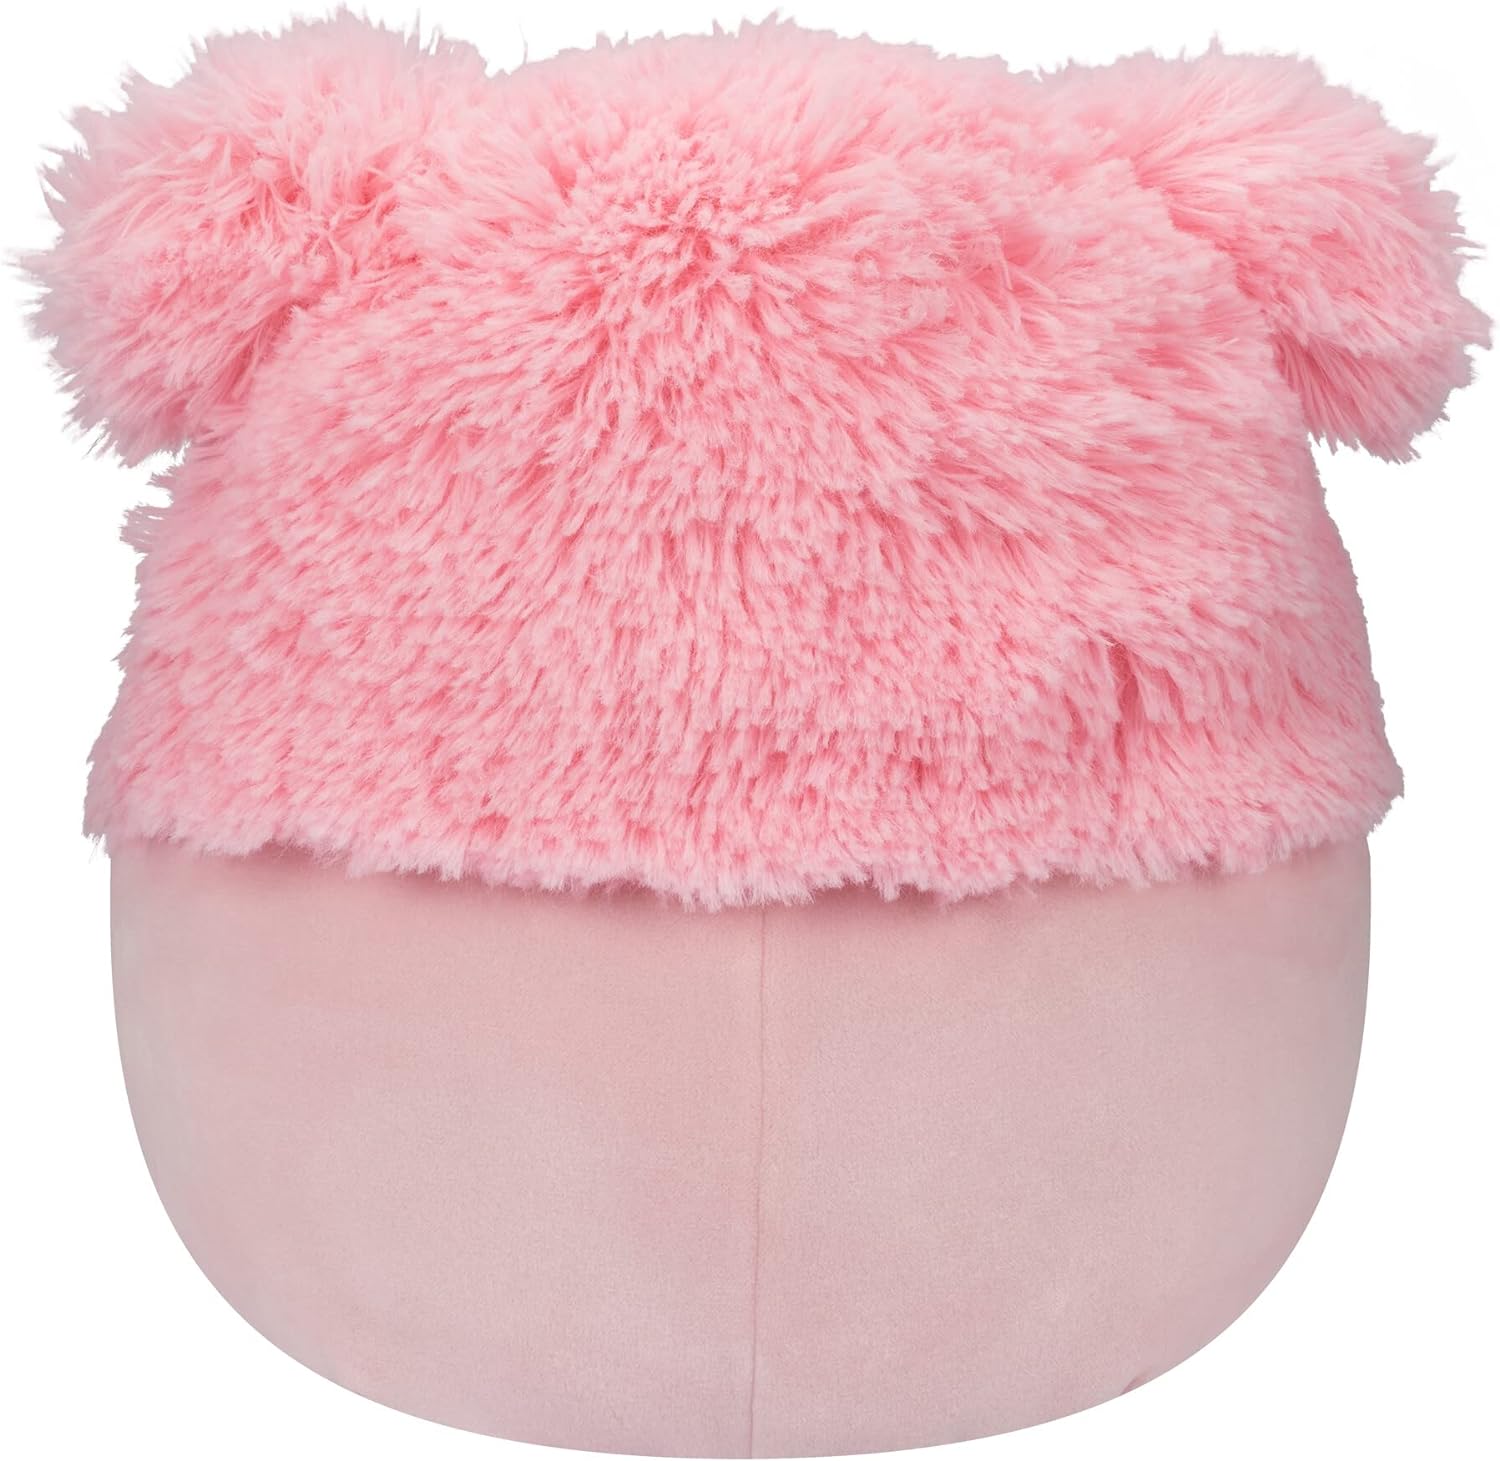 Squishmallows 8-Inch Brina Pink Bigfoot with Fuzzy Belly - Little Ultrasoft Official Kelly Toy Plush